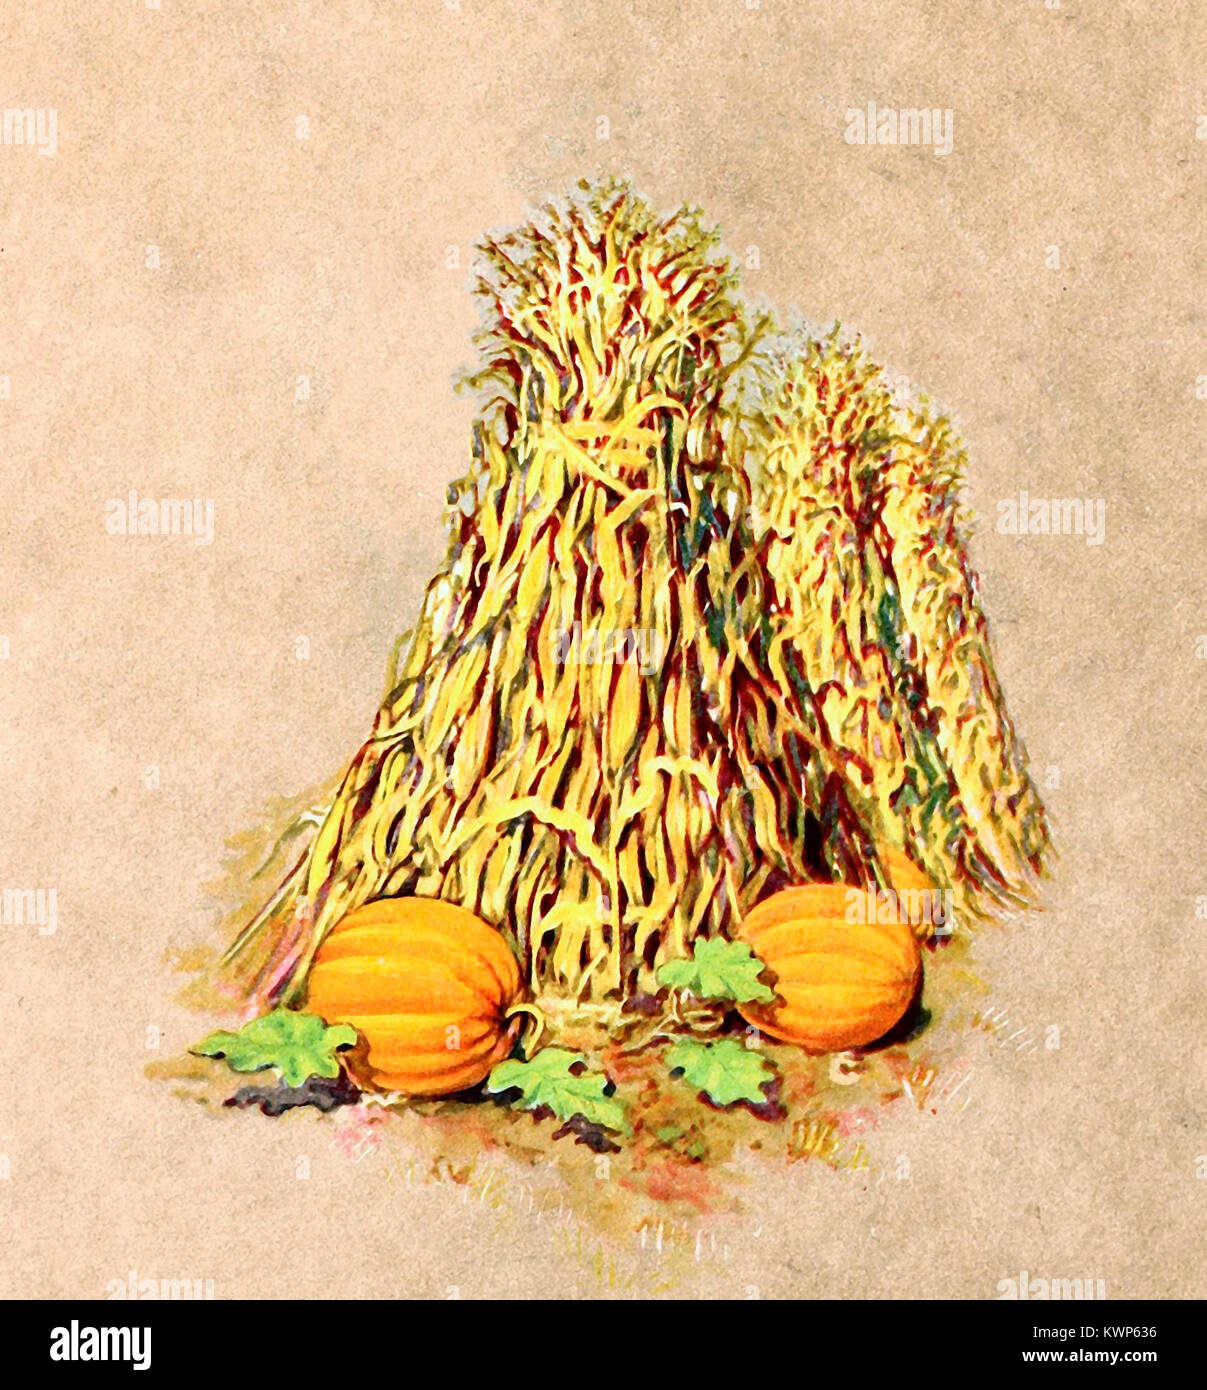 Vintage Harvest Illustration - Thanksgiving and Fall - Pumpkins and Hay Stock Photo